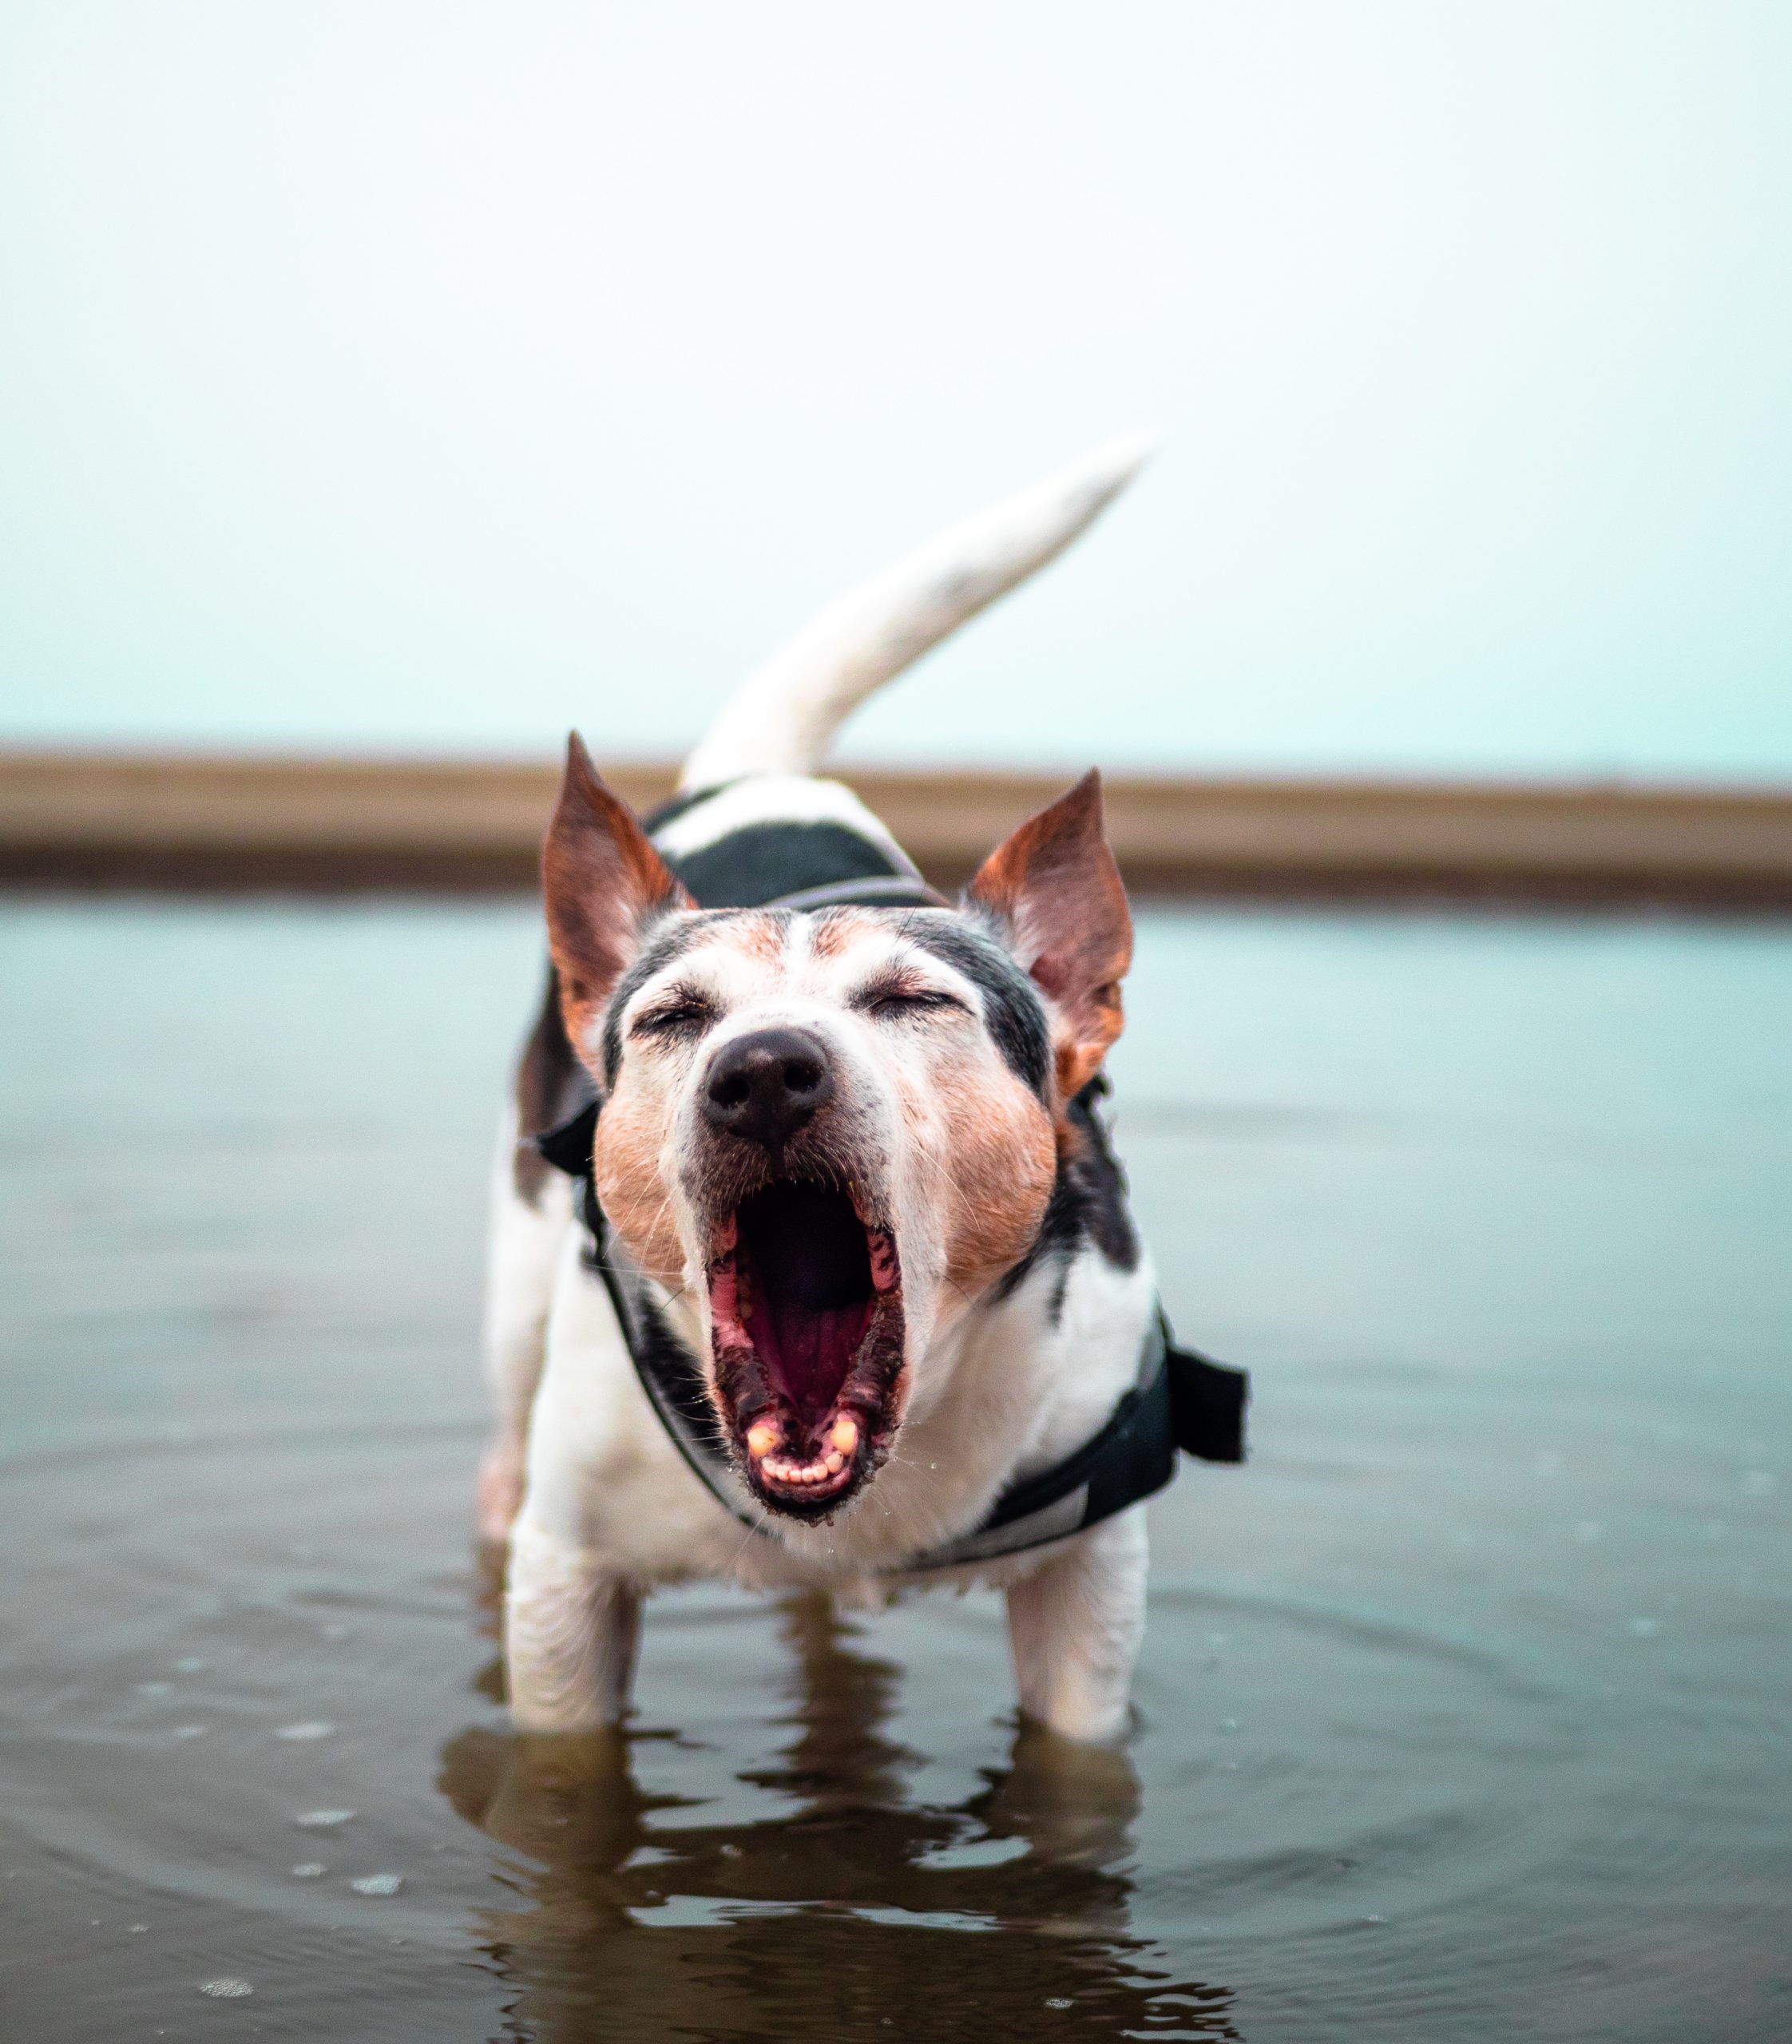 Why Do Dogs Howl? Understanding Dog Communication and Behavior